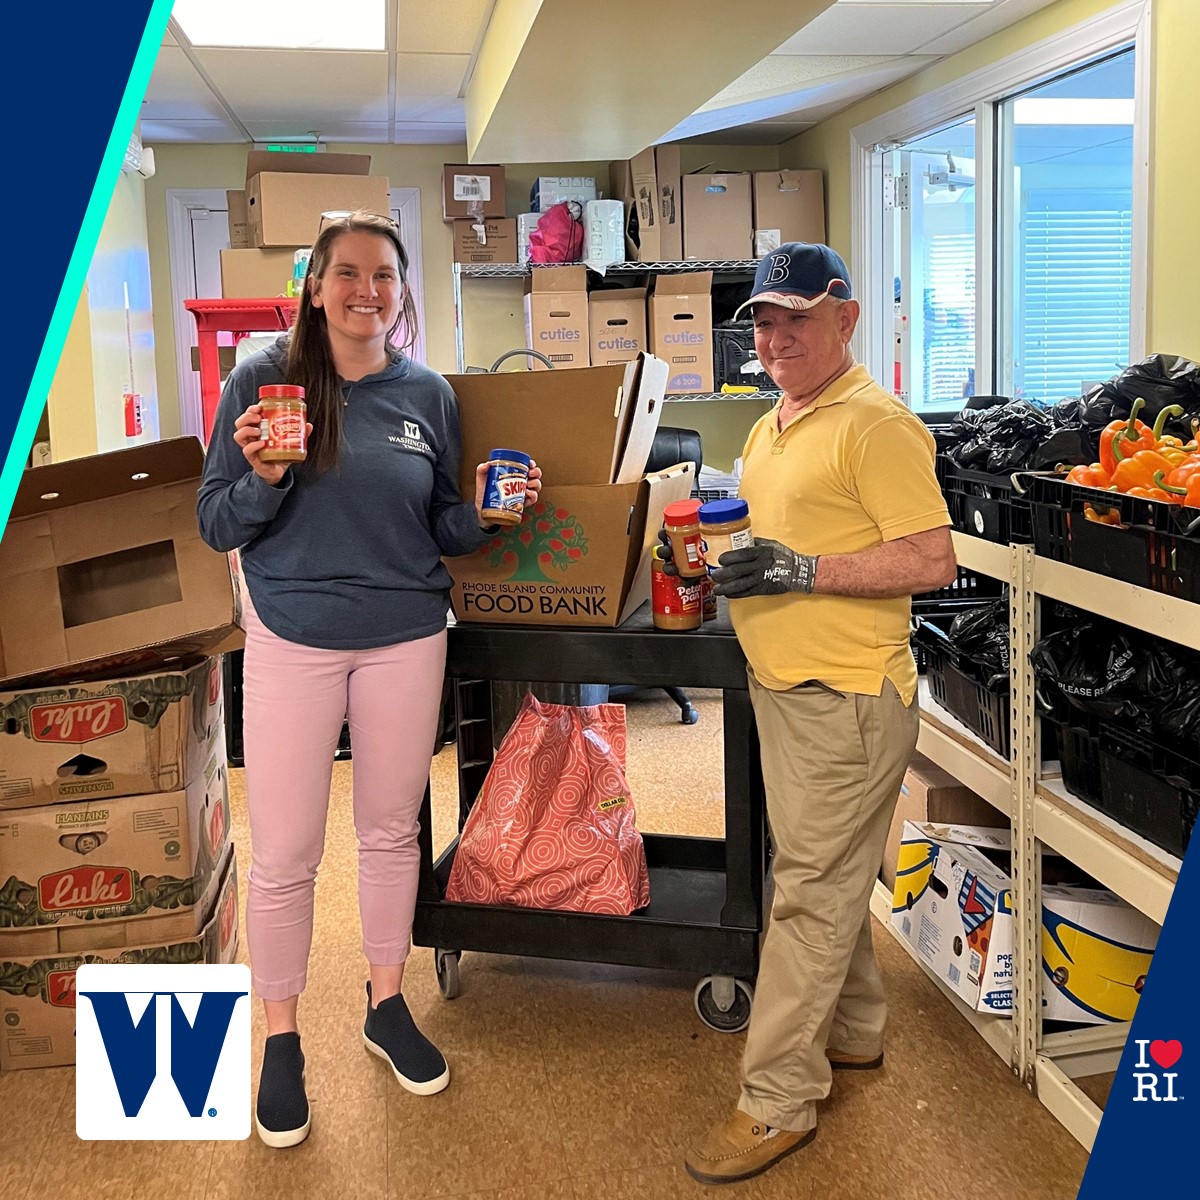 We were proud to support the Federal Hill House Olneyville Food Center through our #PeanutButteBank drive. 100+ jars were donated, helping those facing food insecurity. We look forward to joining the neighborhood with our new branch soon! What we value is you.™ #WashTrust